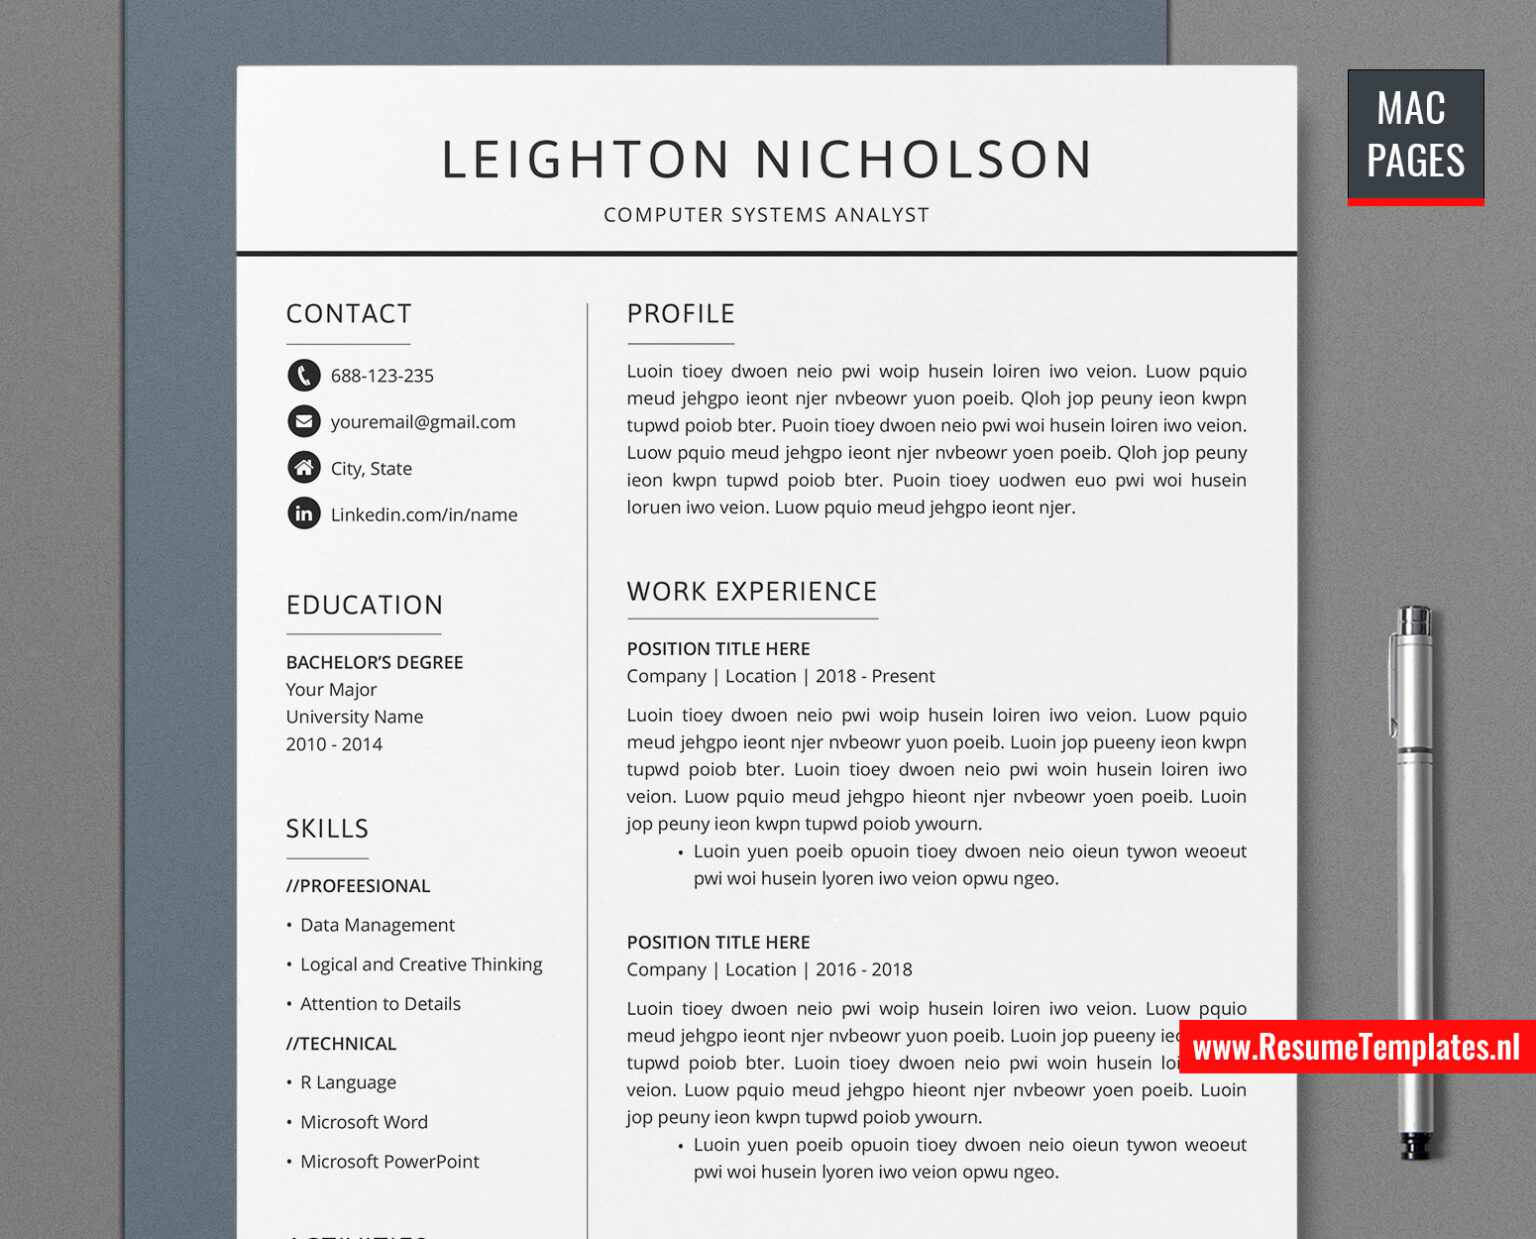 For Mac Pages Simple CV Template Resume Template For Mac Pages Cover Letter Curriculum